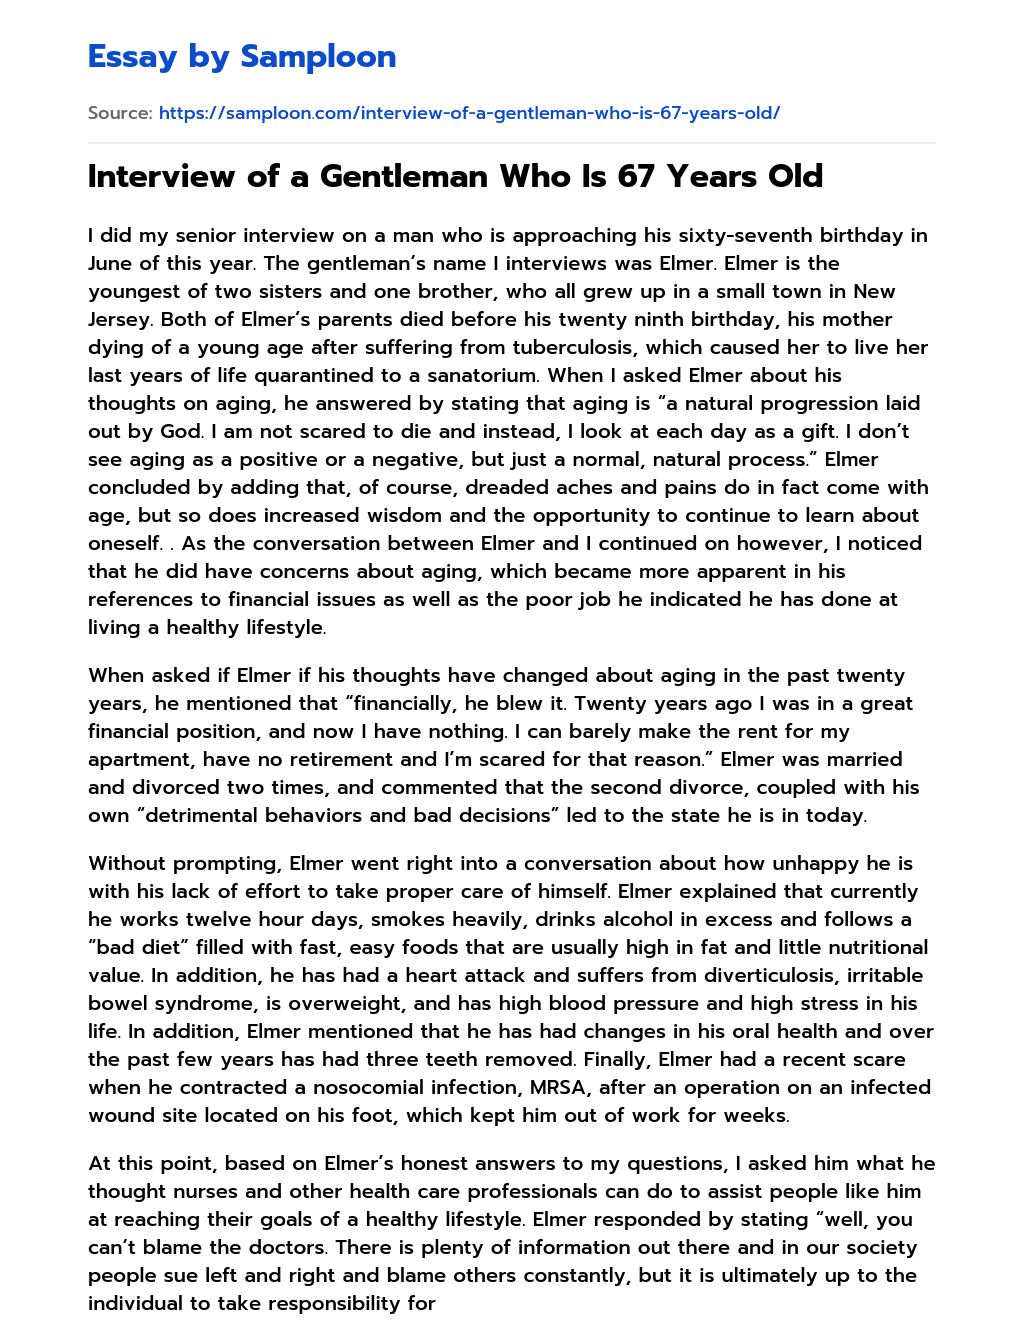 Interview of a Gentleman Who Is 67 Years Old essay